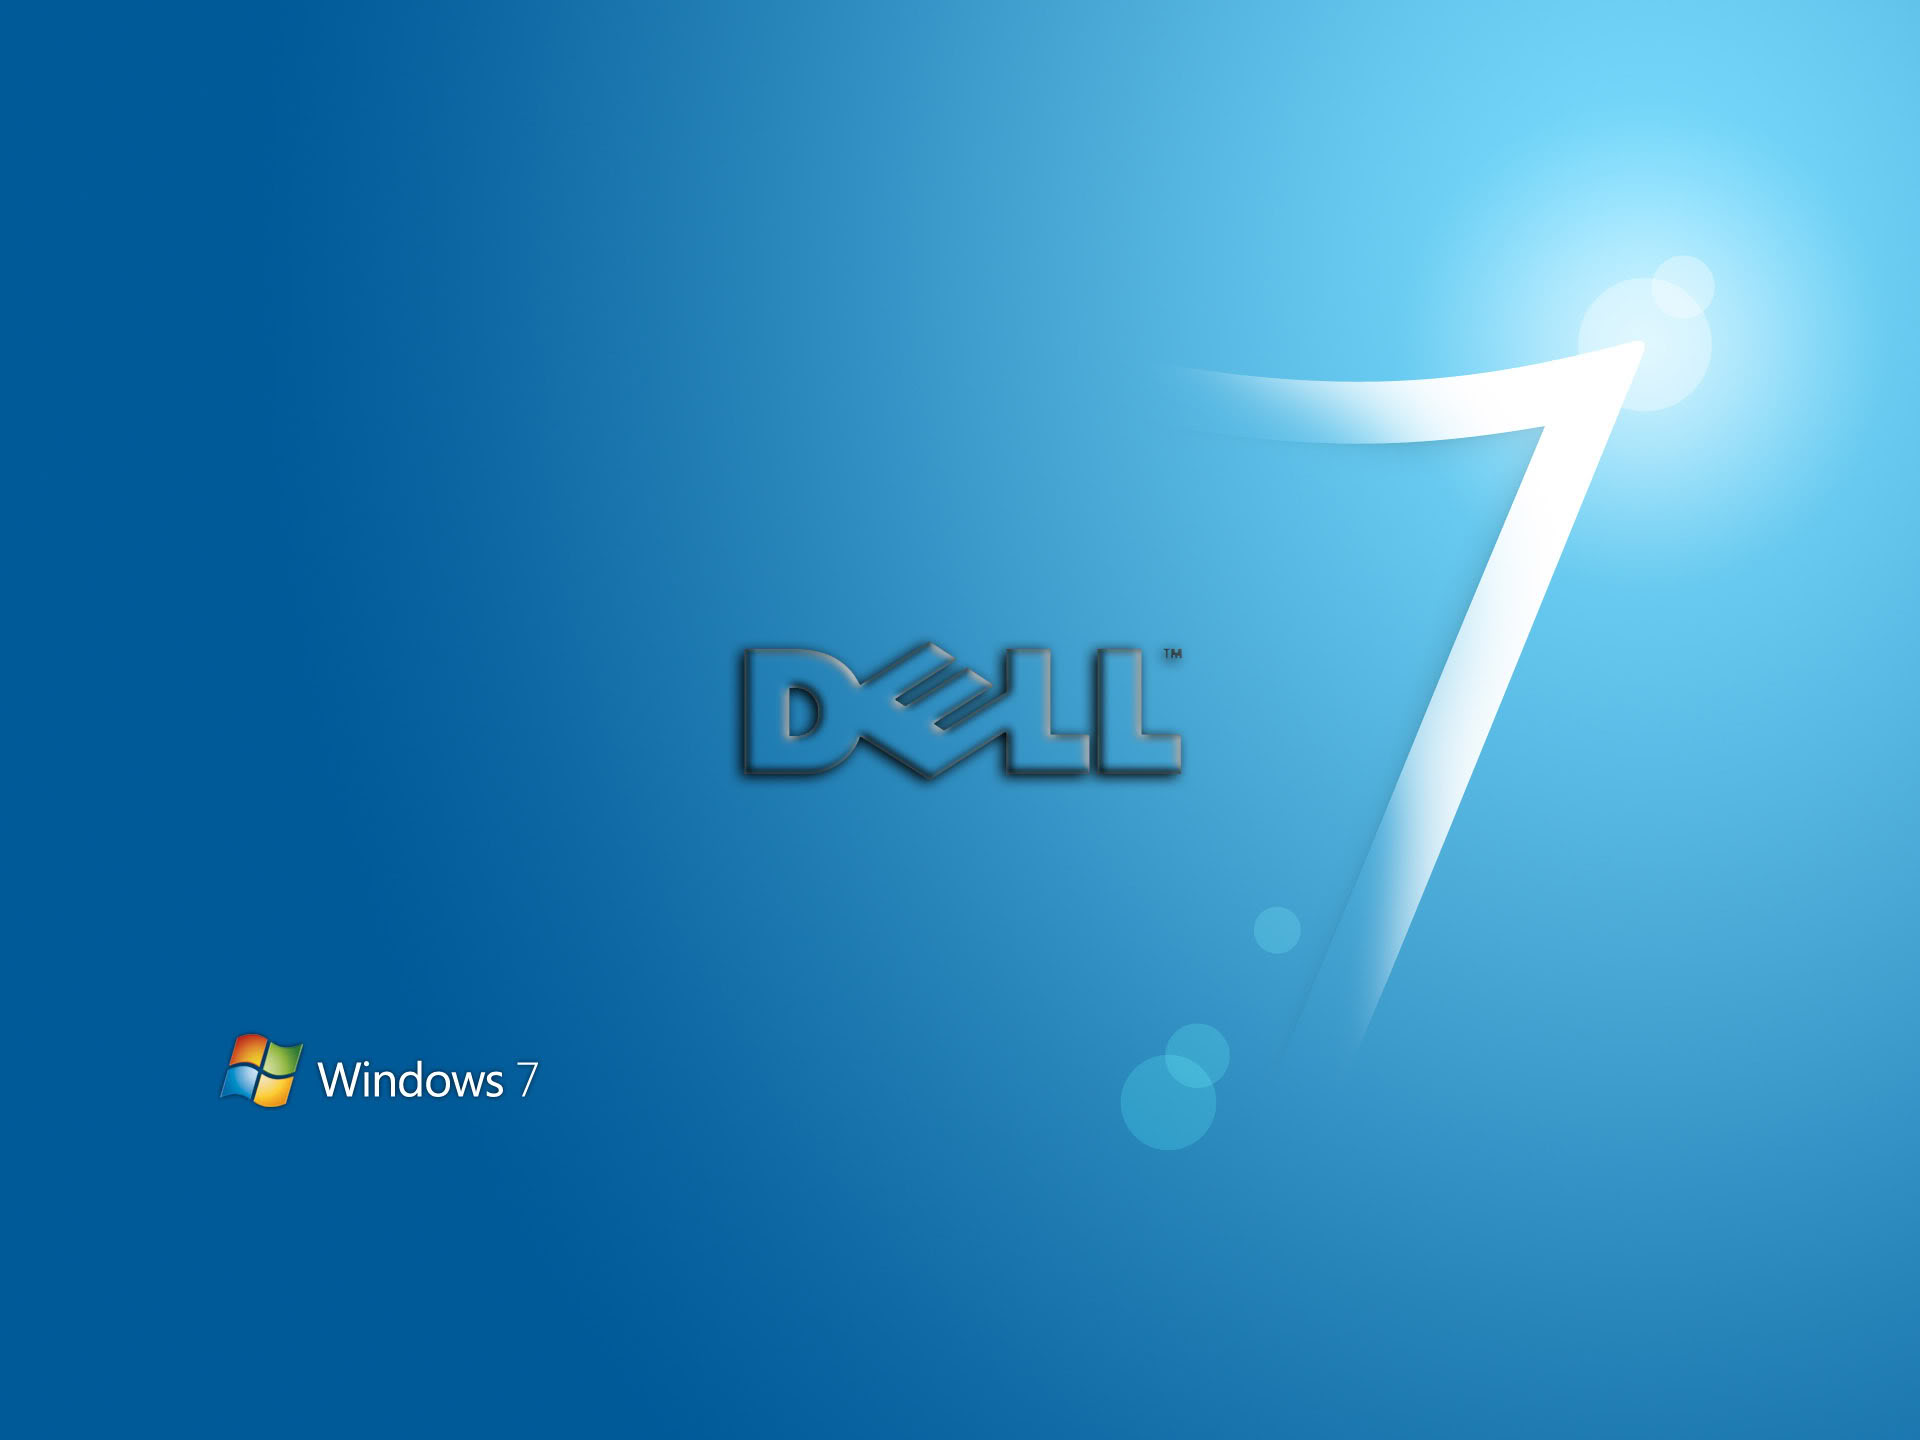 Free Download Dell Wallpaper Dell Wallpapers 1920x1440 For Your